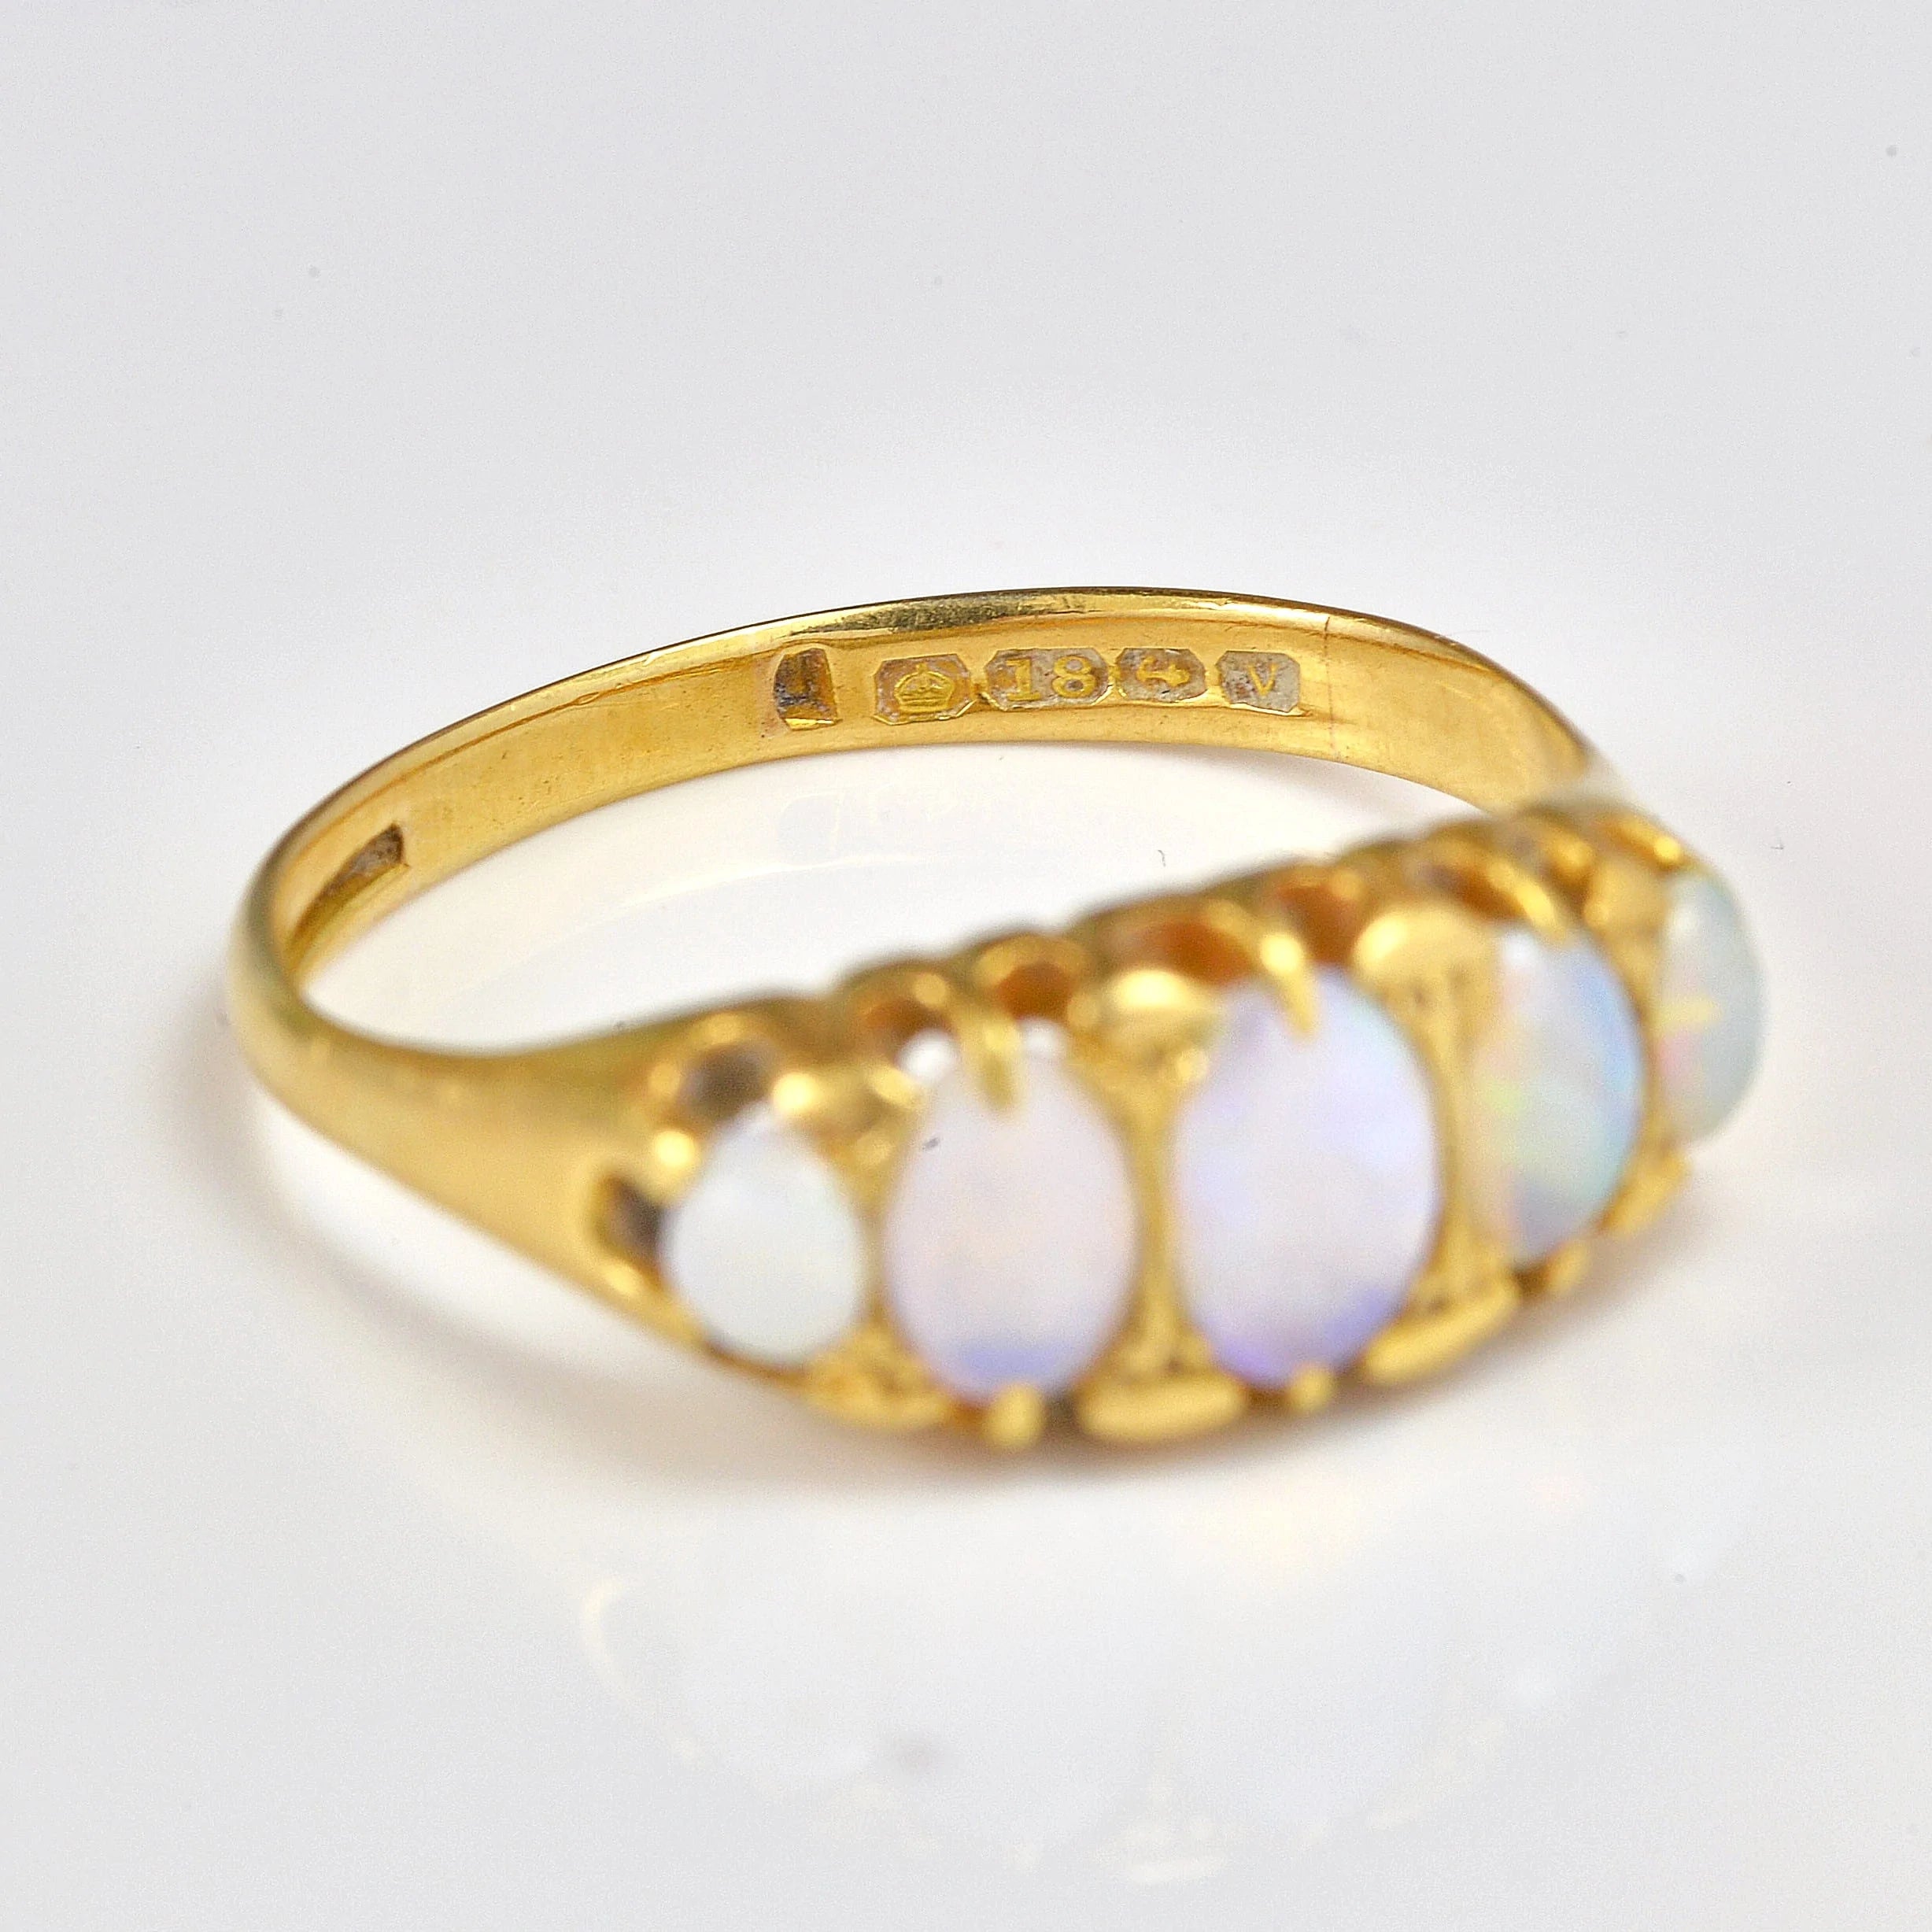 Ellibelle Jewellery Victorian Opal 18ct Gold Five Stone Ring